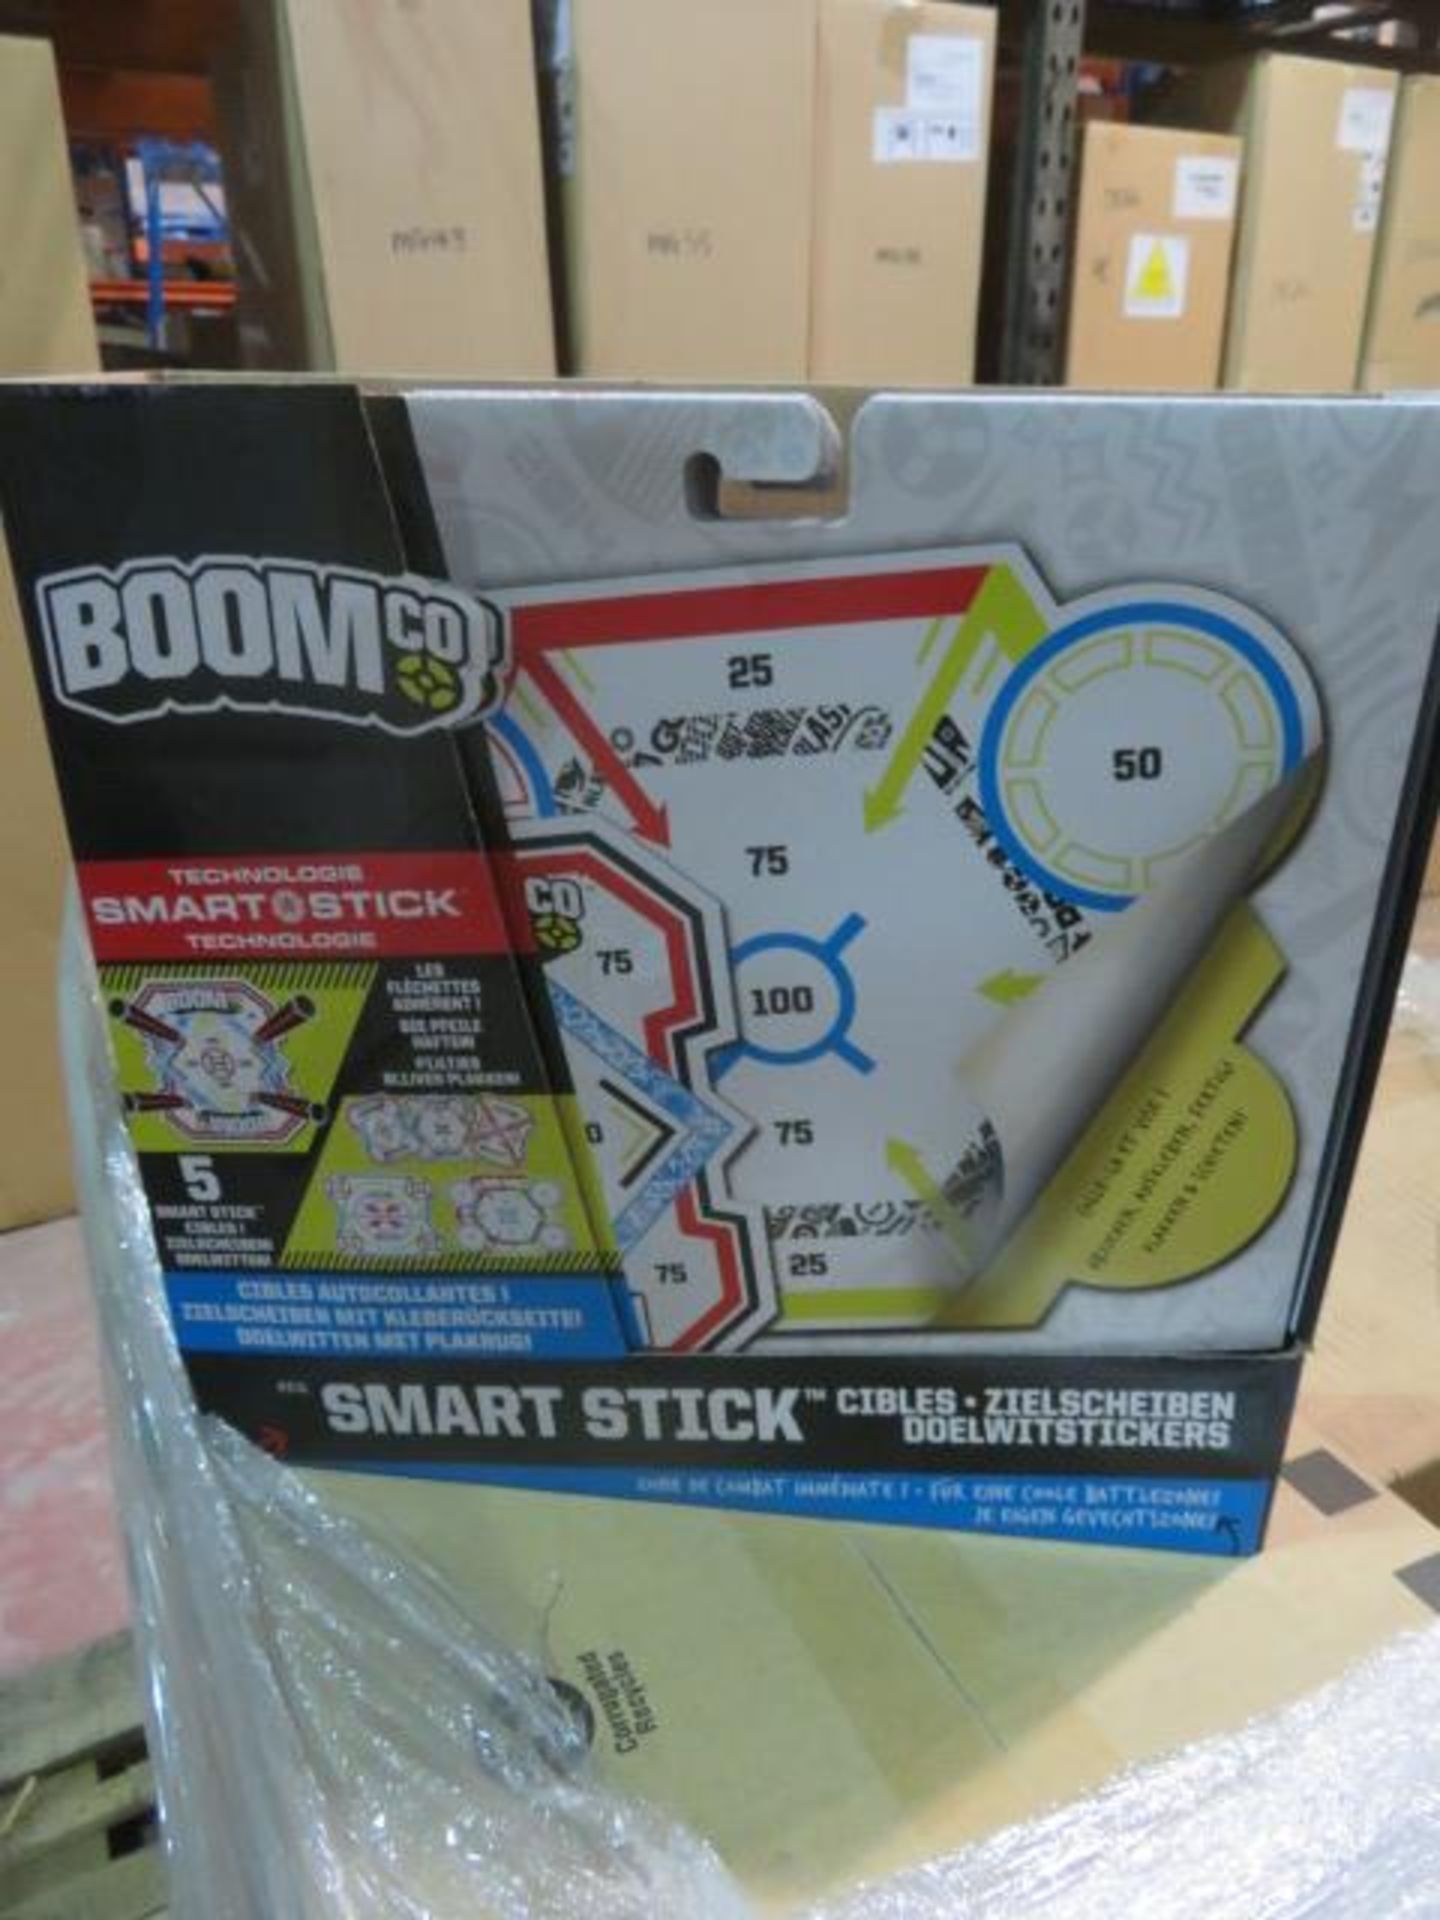 (P3) PALLET TO CONTAIN 800 x MATTEL BOOMCO SMART STICK - NEW - RRP £8.99 EACH